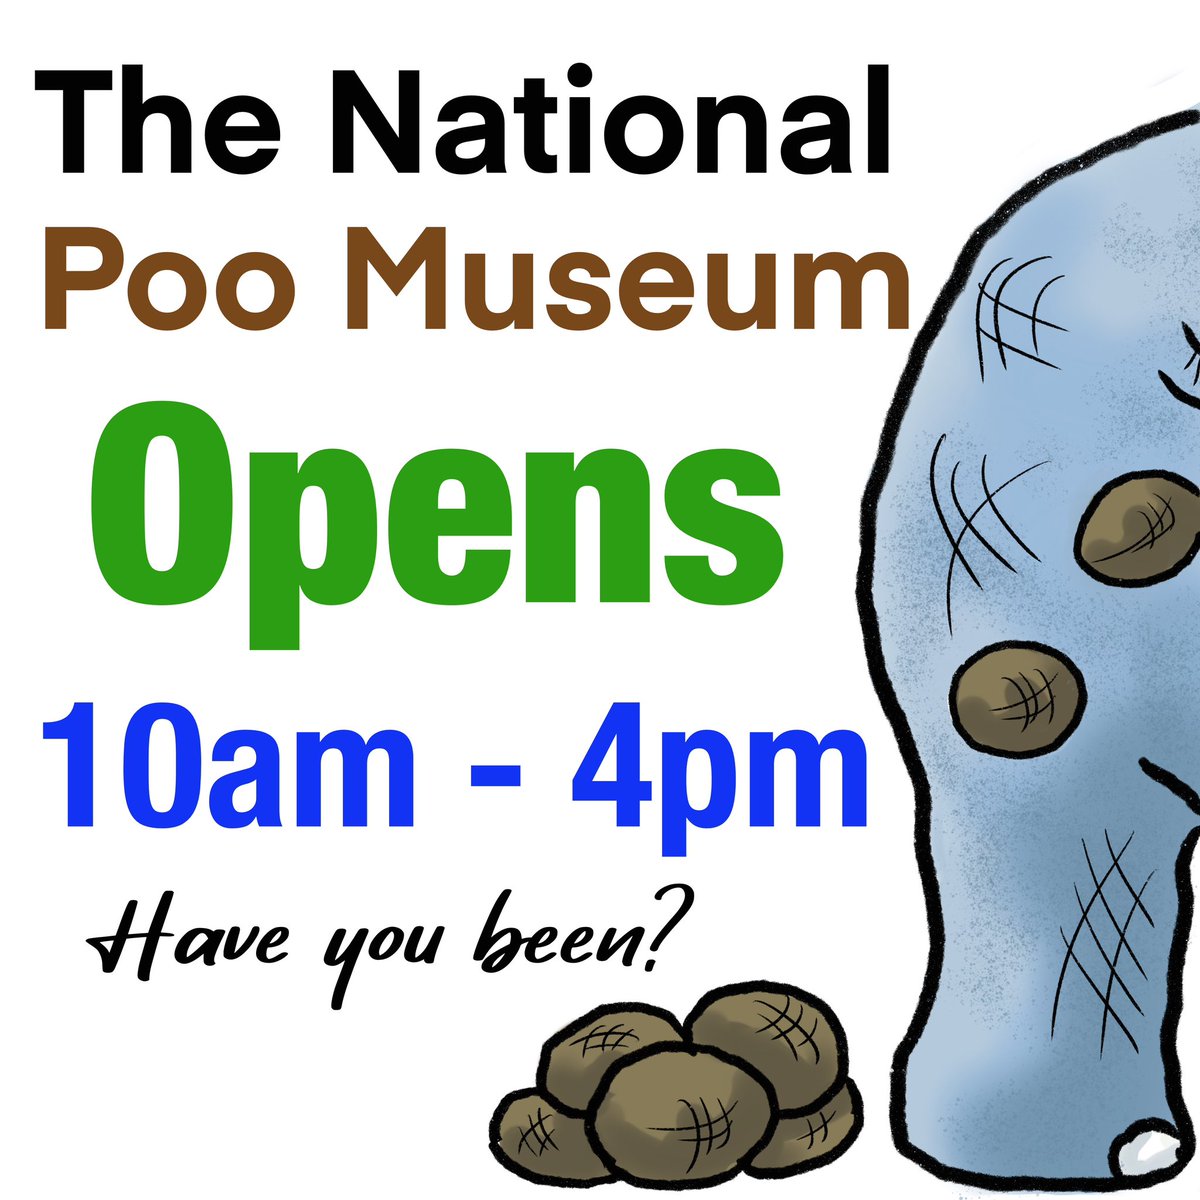 NOW OPEN 7 DAYS A WEEK UNTIL THE END OF SEPTEMBER 👏🏻👏🏻👏🏻👏🏻 poomuseum.org/find-us